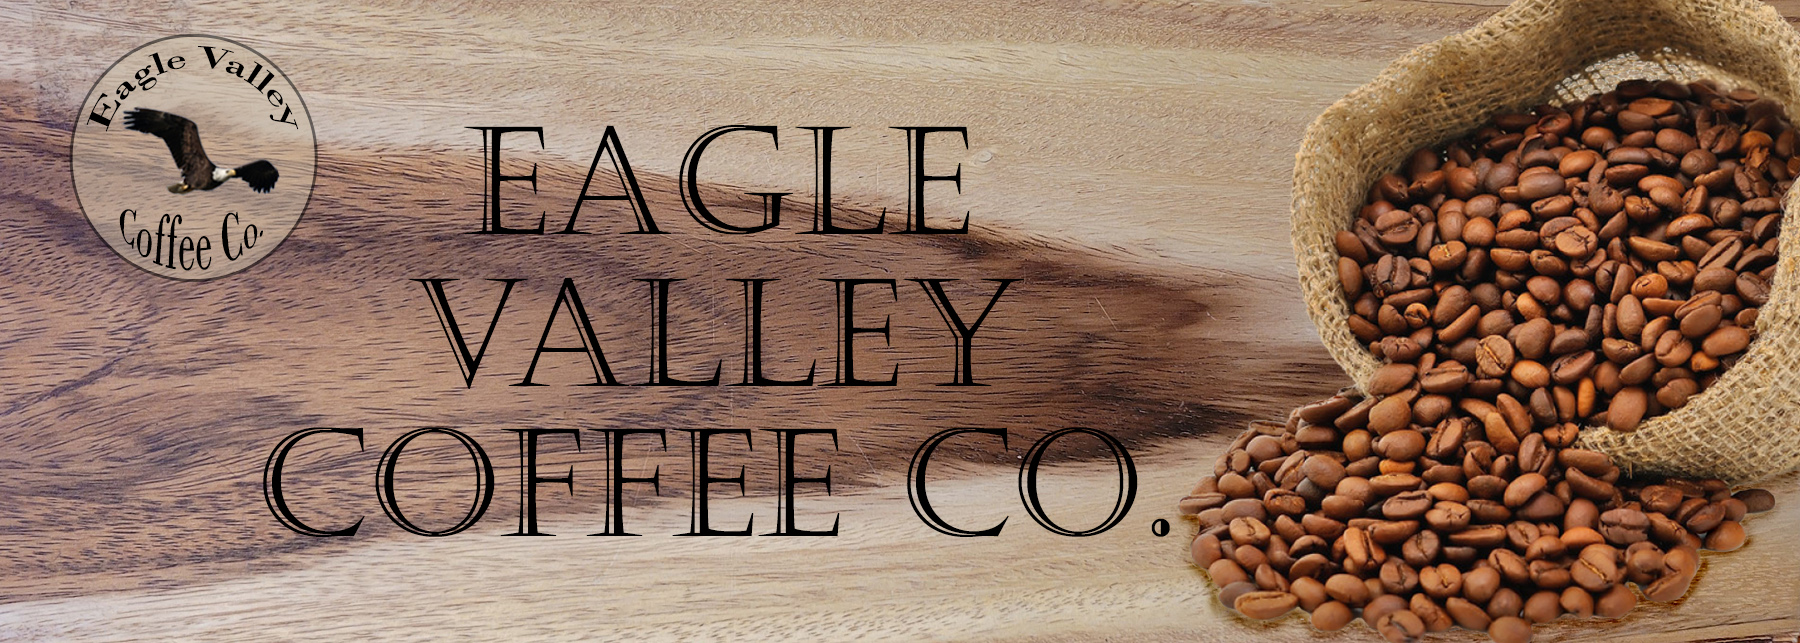 Eagle Valley Coffee Co